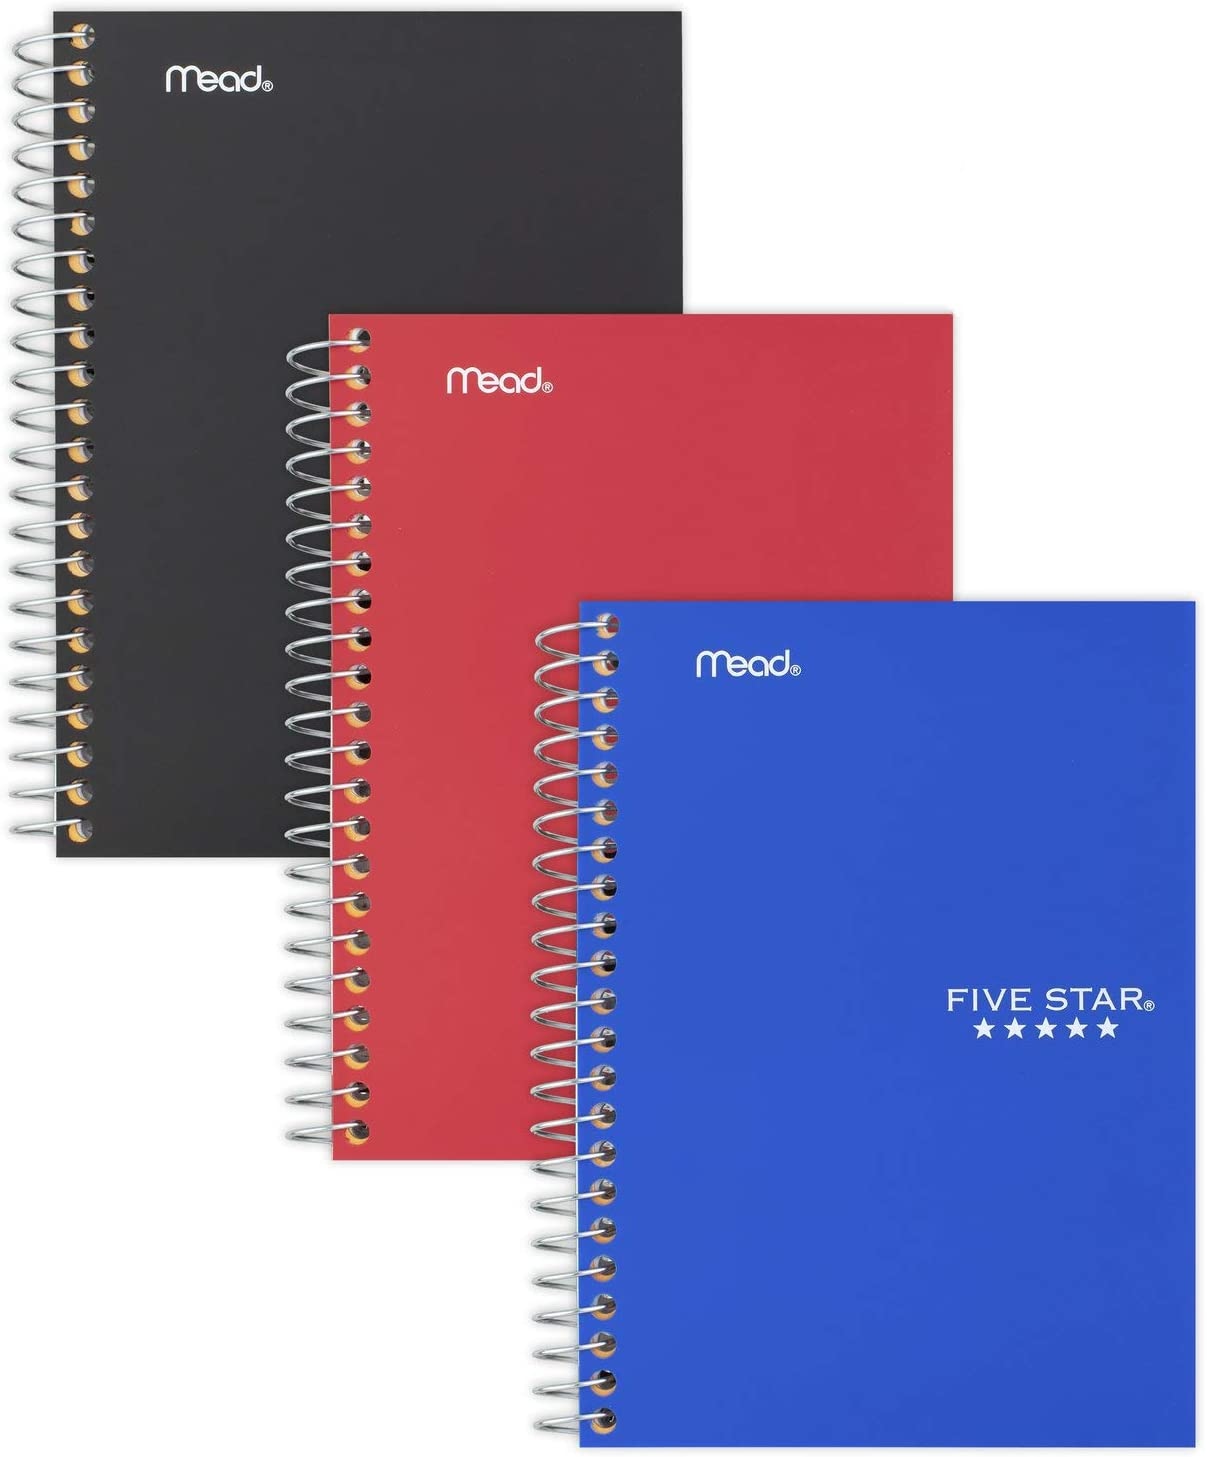 Five Star Personal Spiral Notebooks, 3 Pack, 1-Subject, College Ruled Paper, 7" X 4-3/8", Small Size, 100 Sheets, Assorted Colors Will Vary (38643)